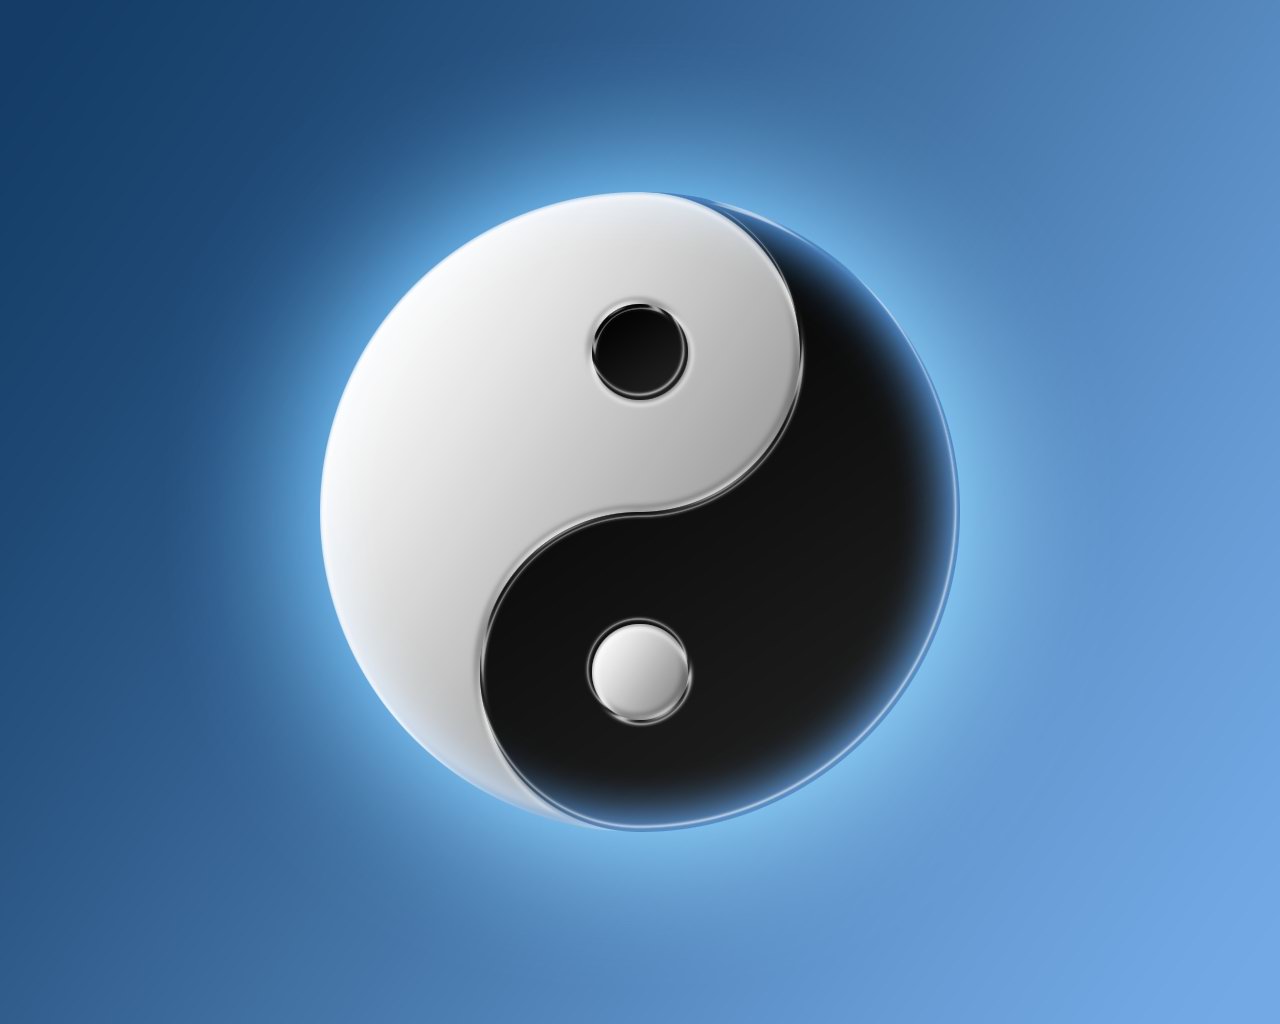 yin and yang | Conscious Relationship Advice for Singles and Dating